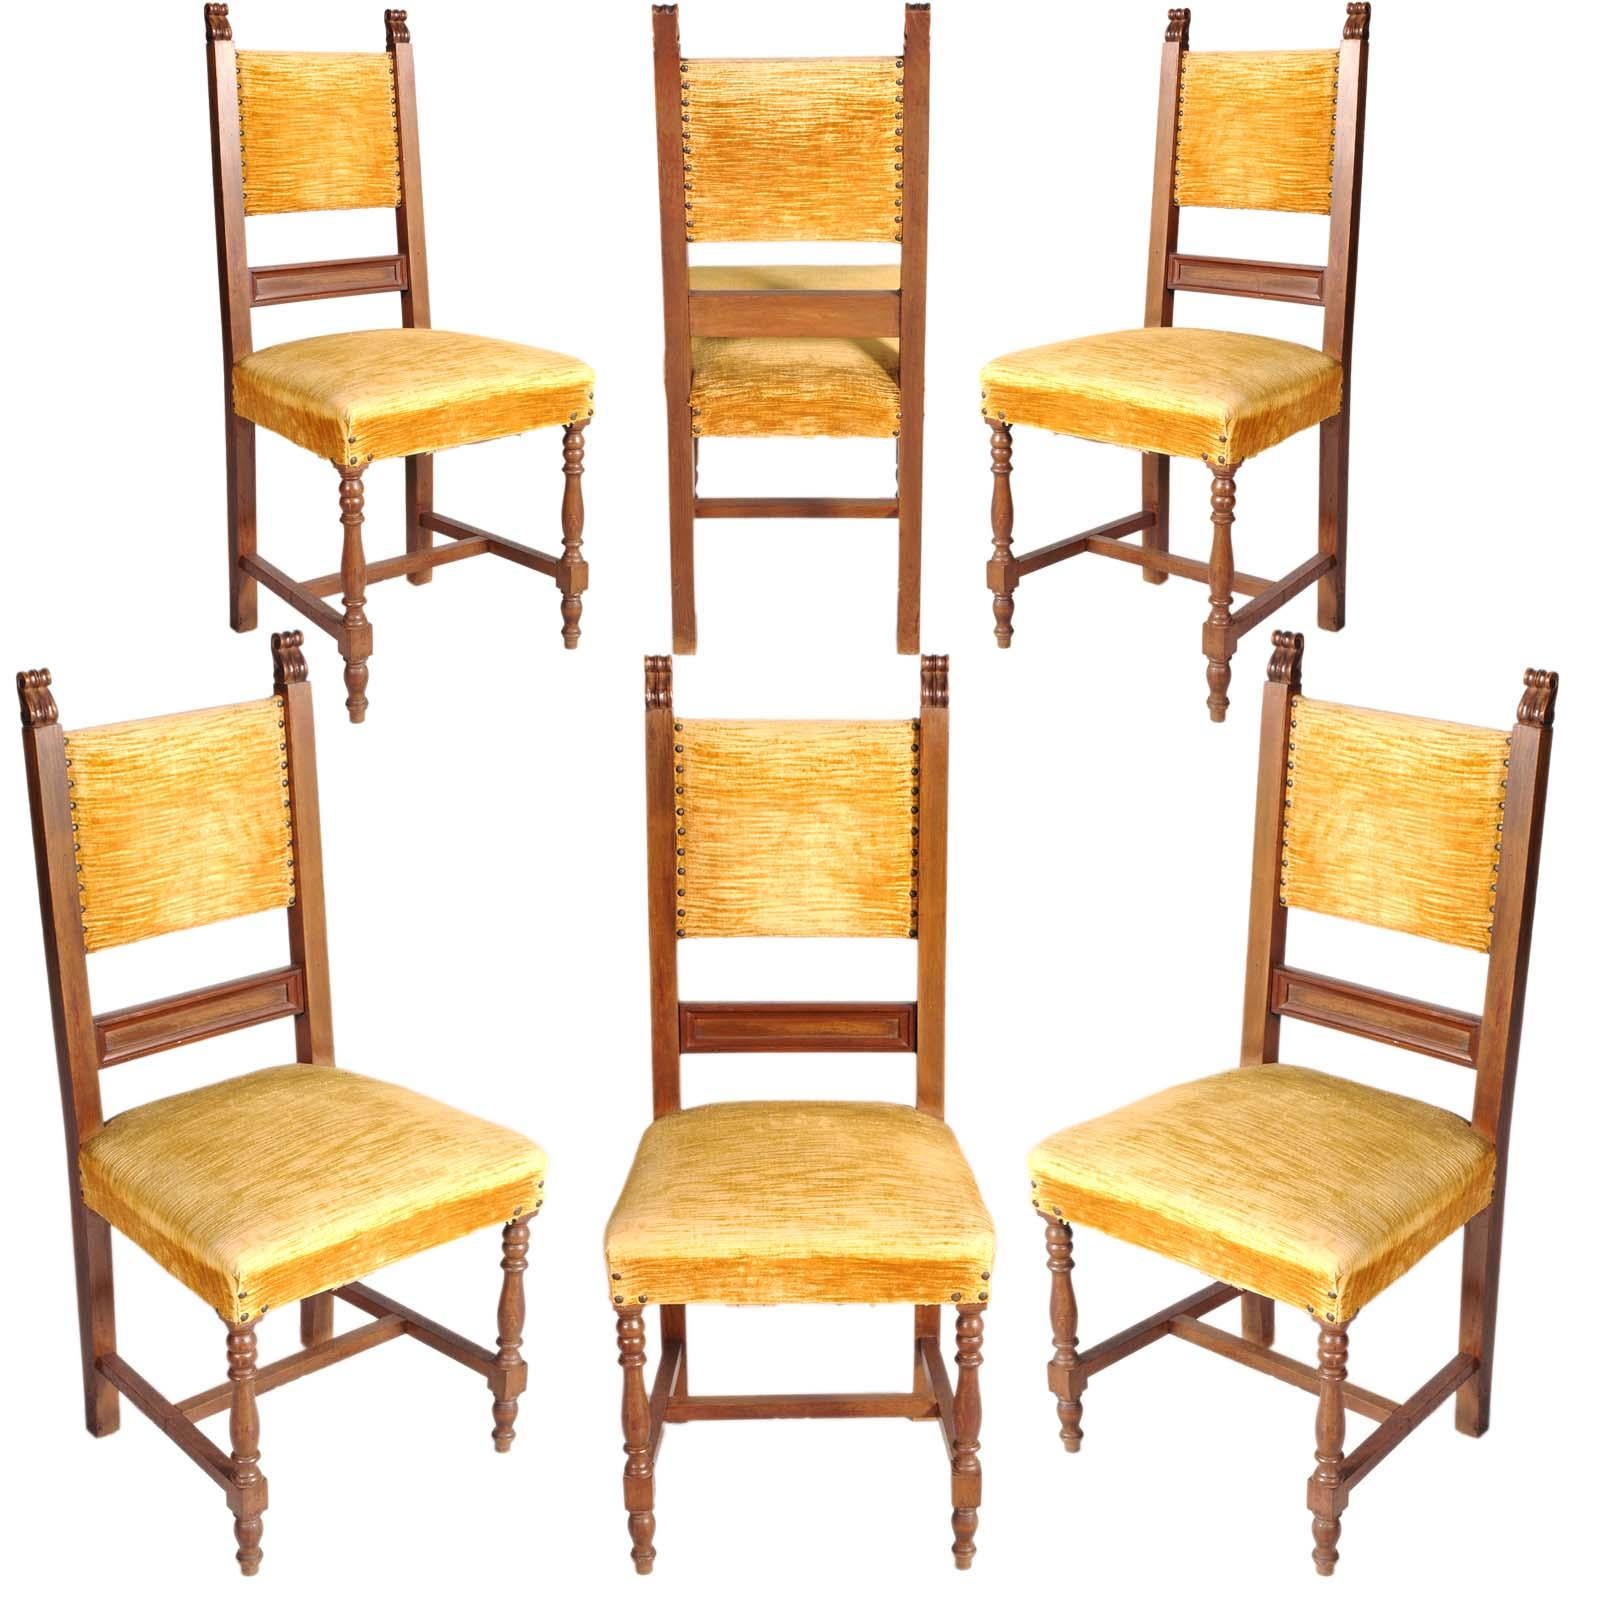 Sturdy carved structure with turned front legs, original seat padding and back with springs and straps of the era, yellow sanitized velvet upholstery in fair condition still usable. Structural rigidity typical of the Renaissance style.
We can